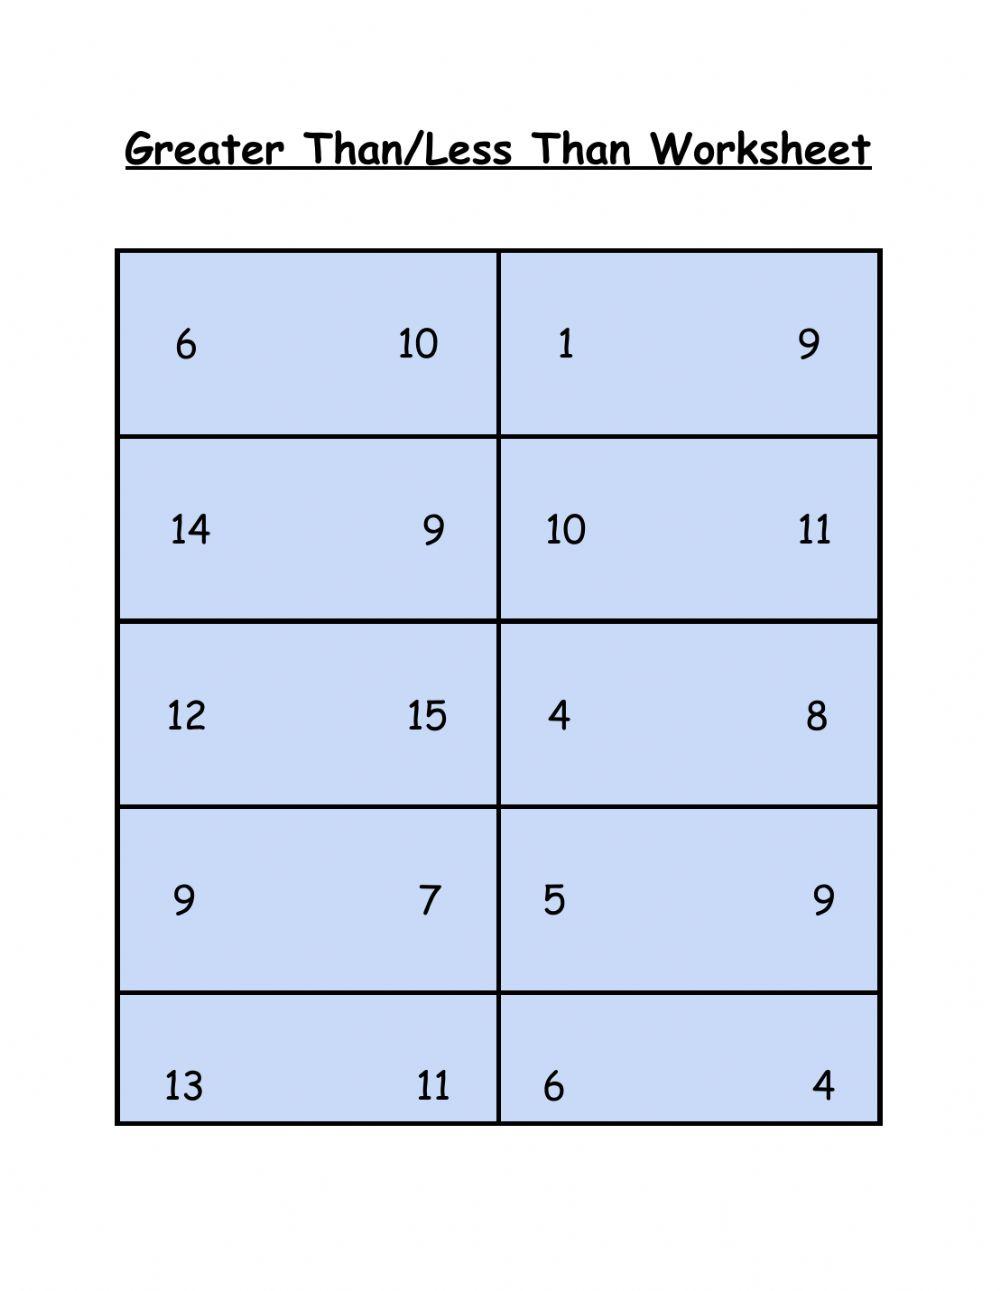 Greater Than-Less than Worksheet